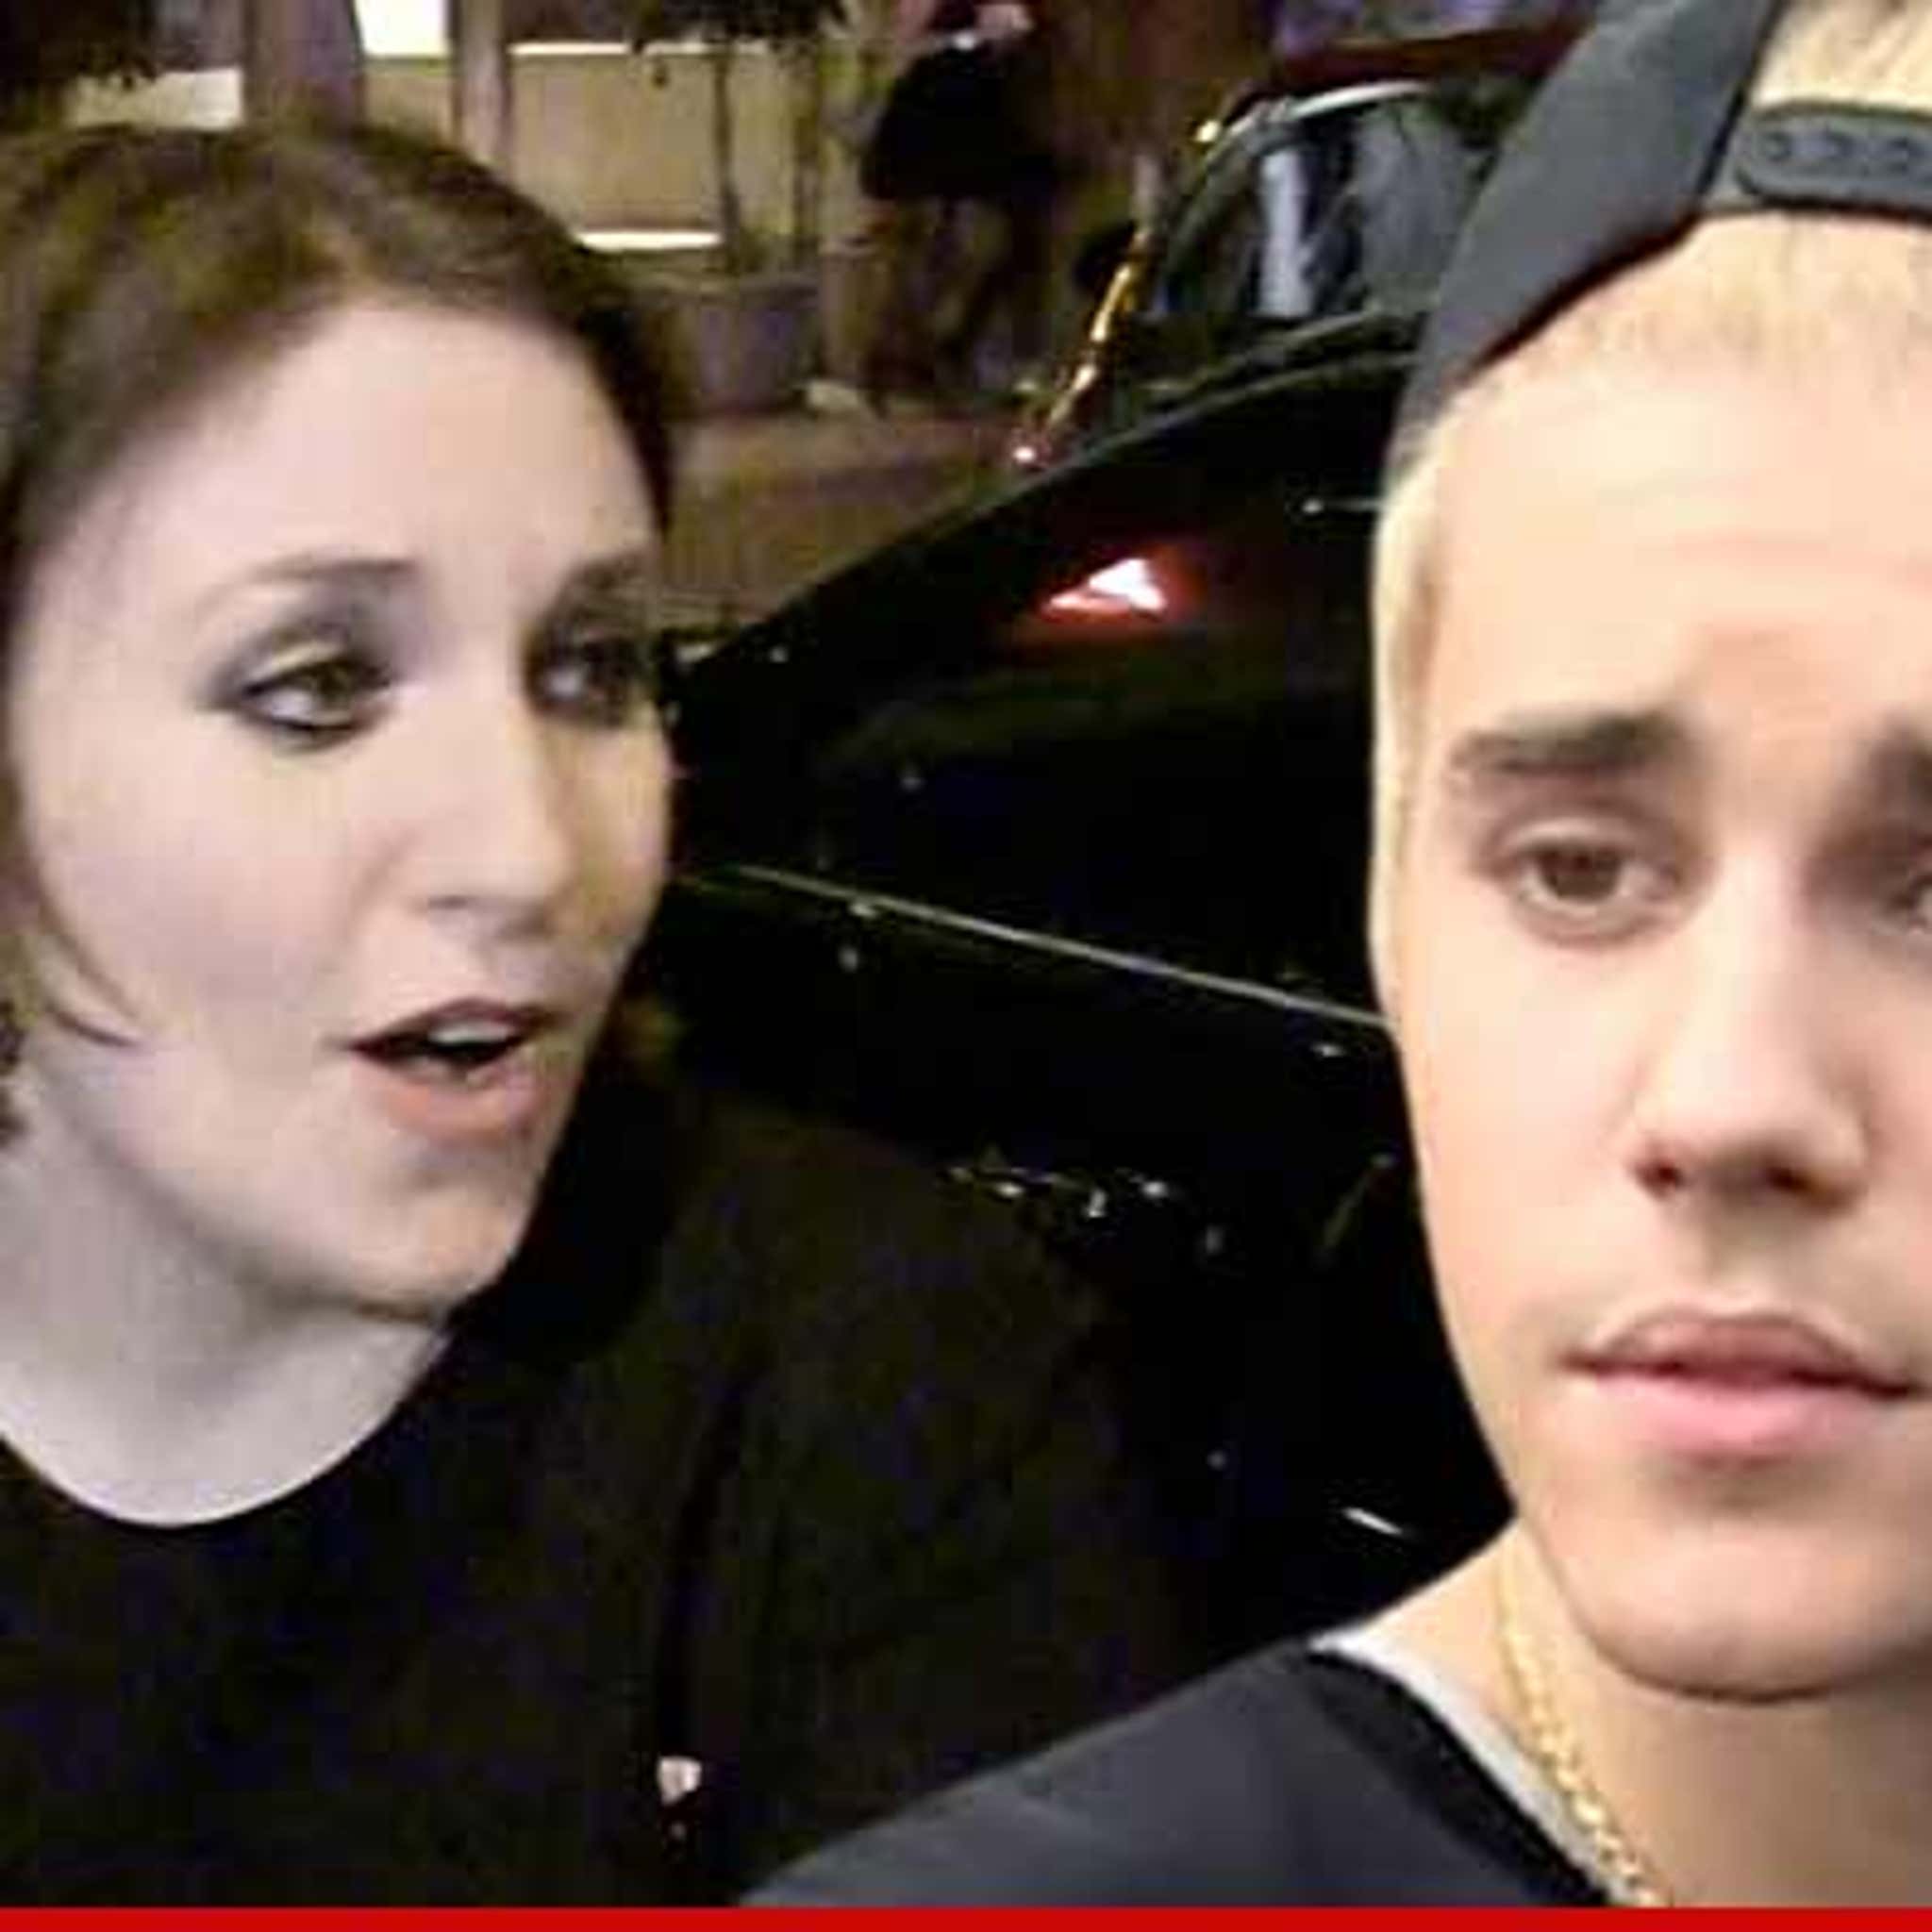 Lena Dunham Tweets Disapproval of Justin Bieber's 'What Do You